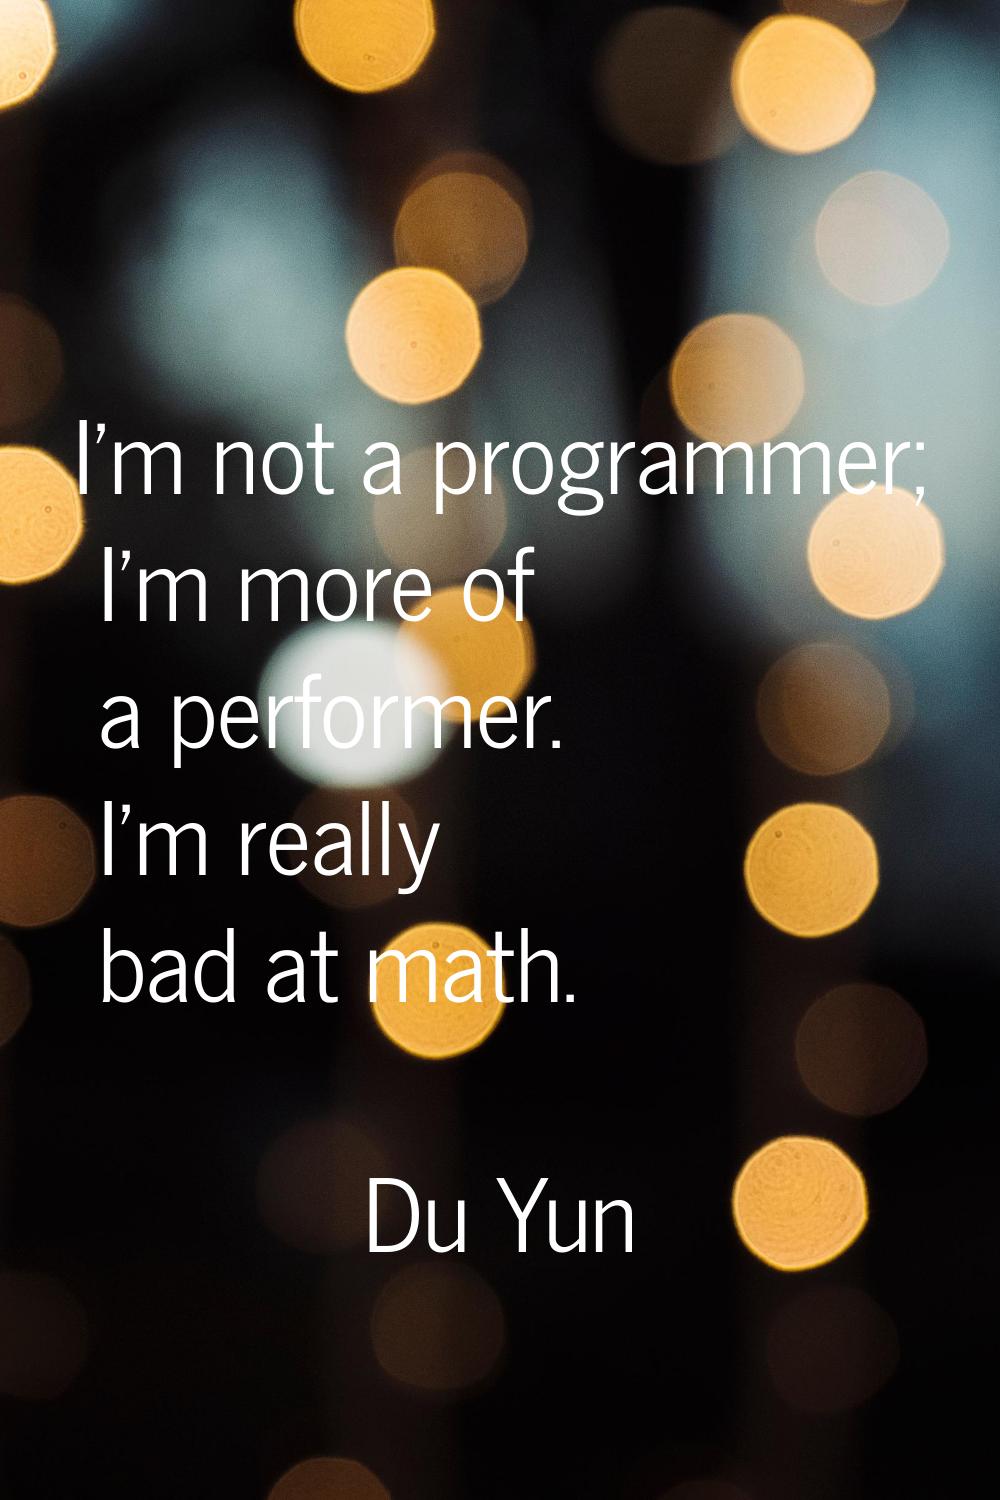 I'm not a programmer; I'm more of a performer. I'm really bad at math.